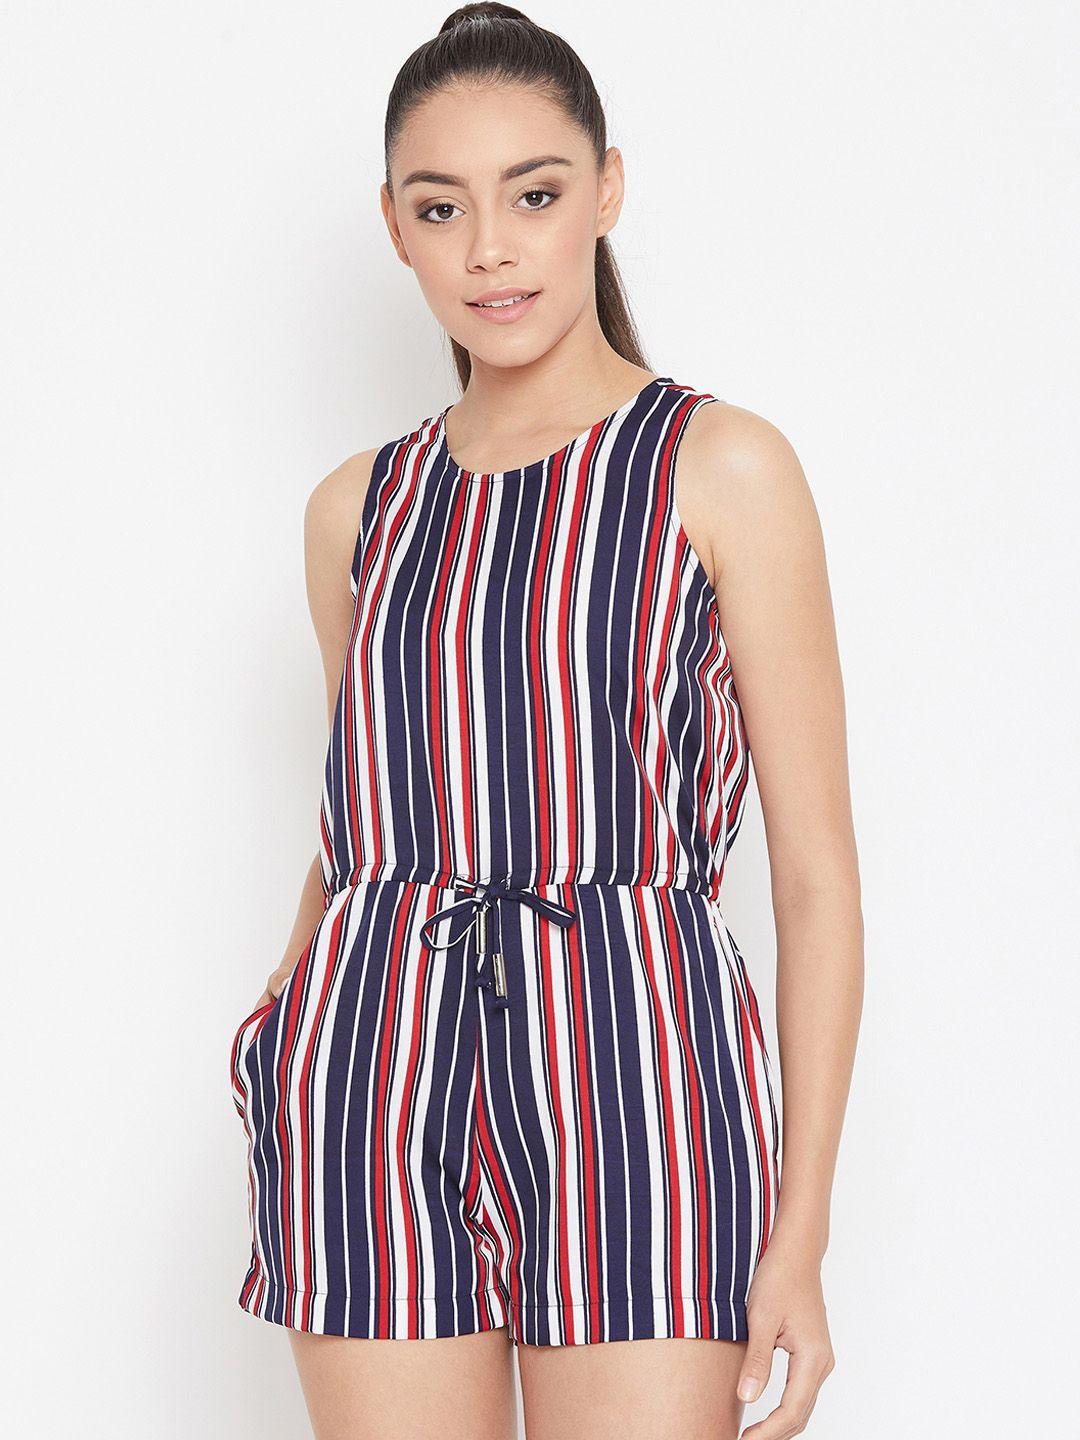 purys women navy blue & red striped playsuit